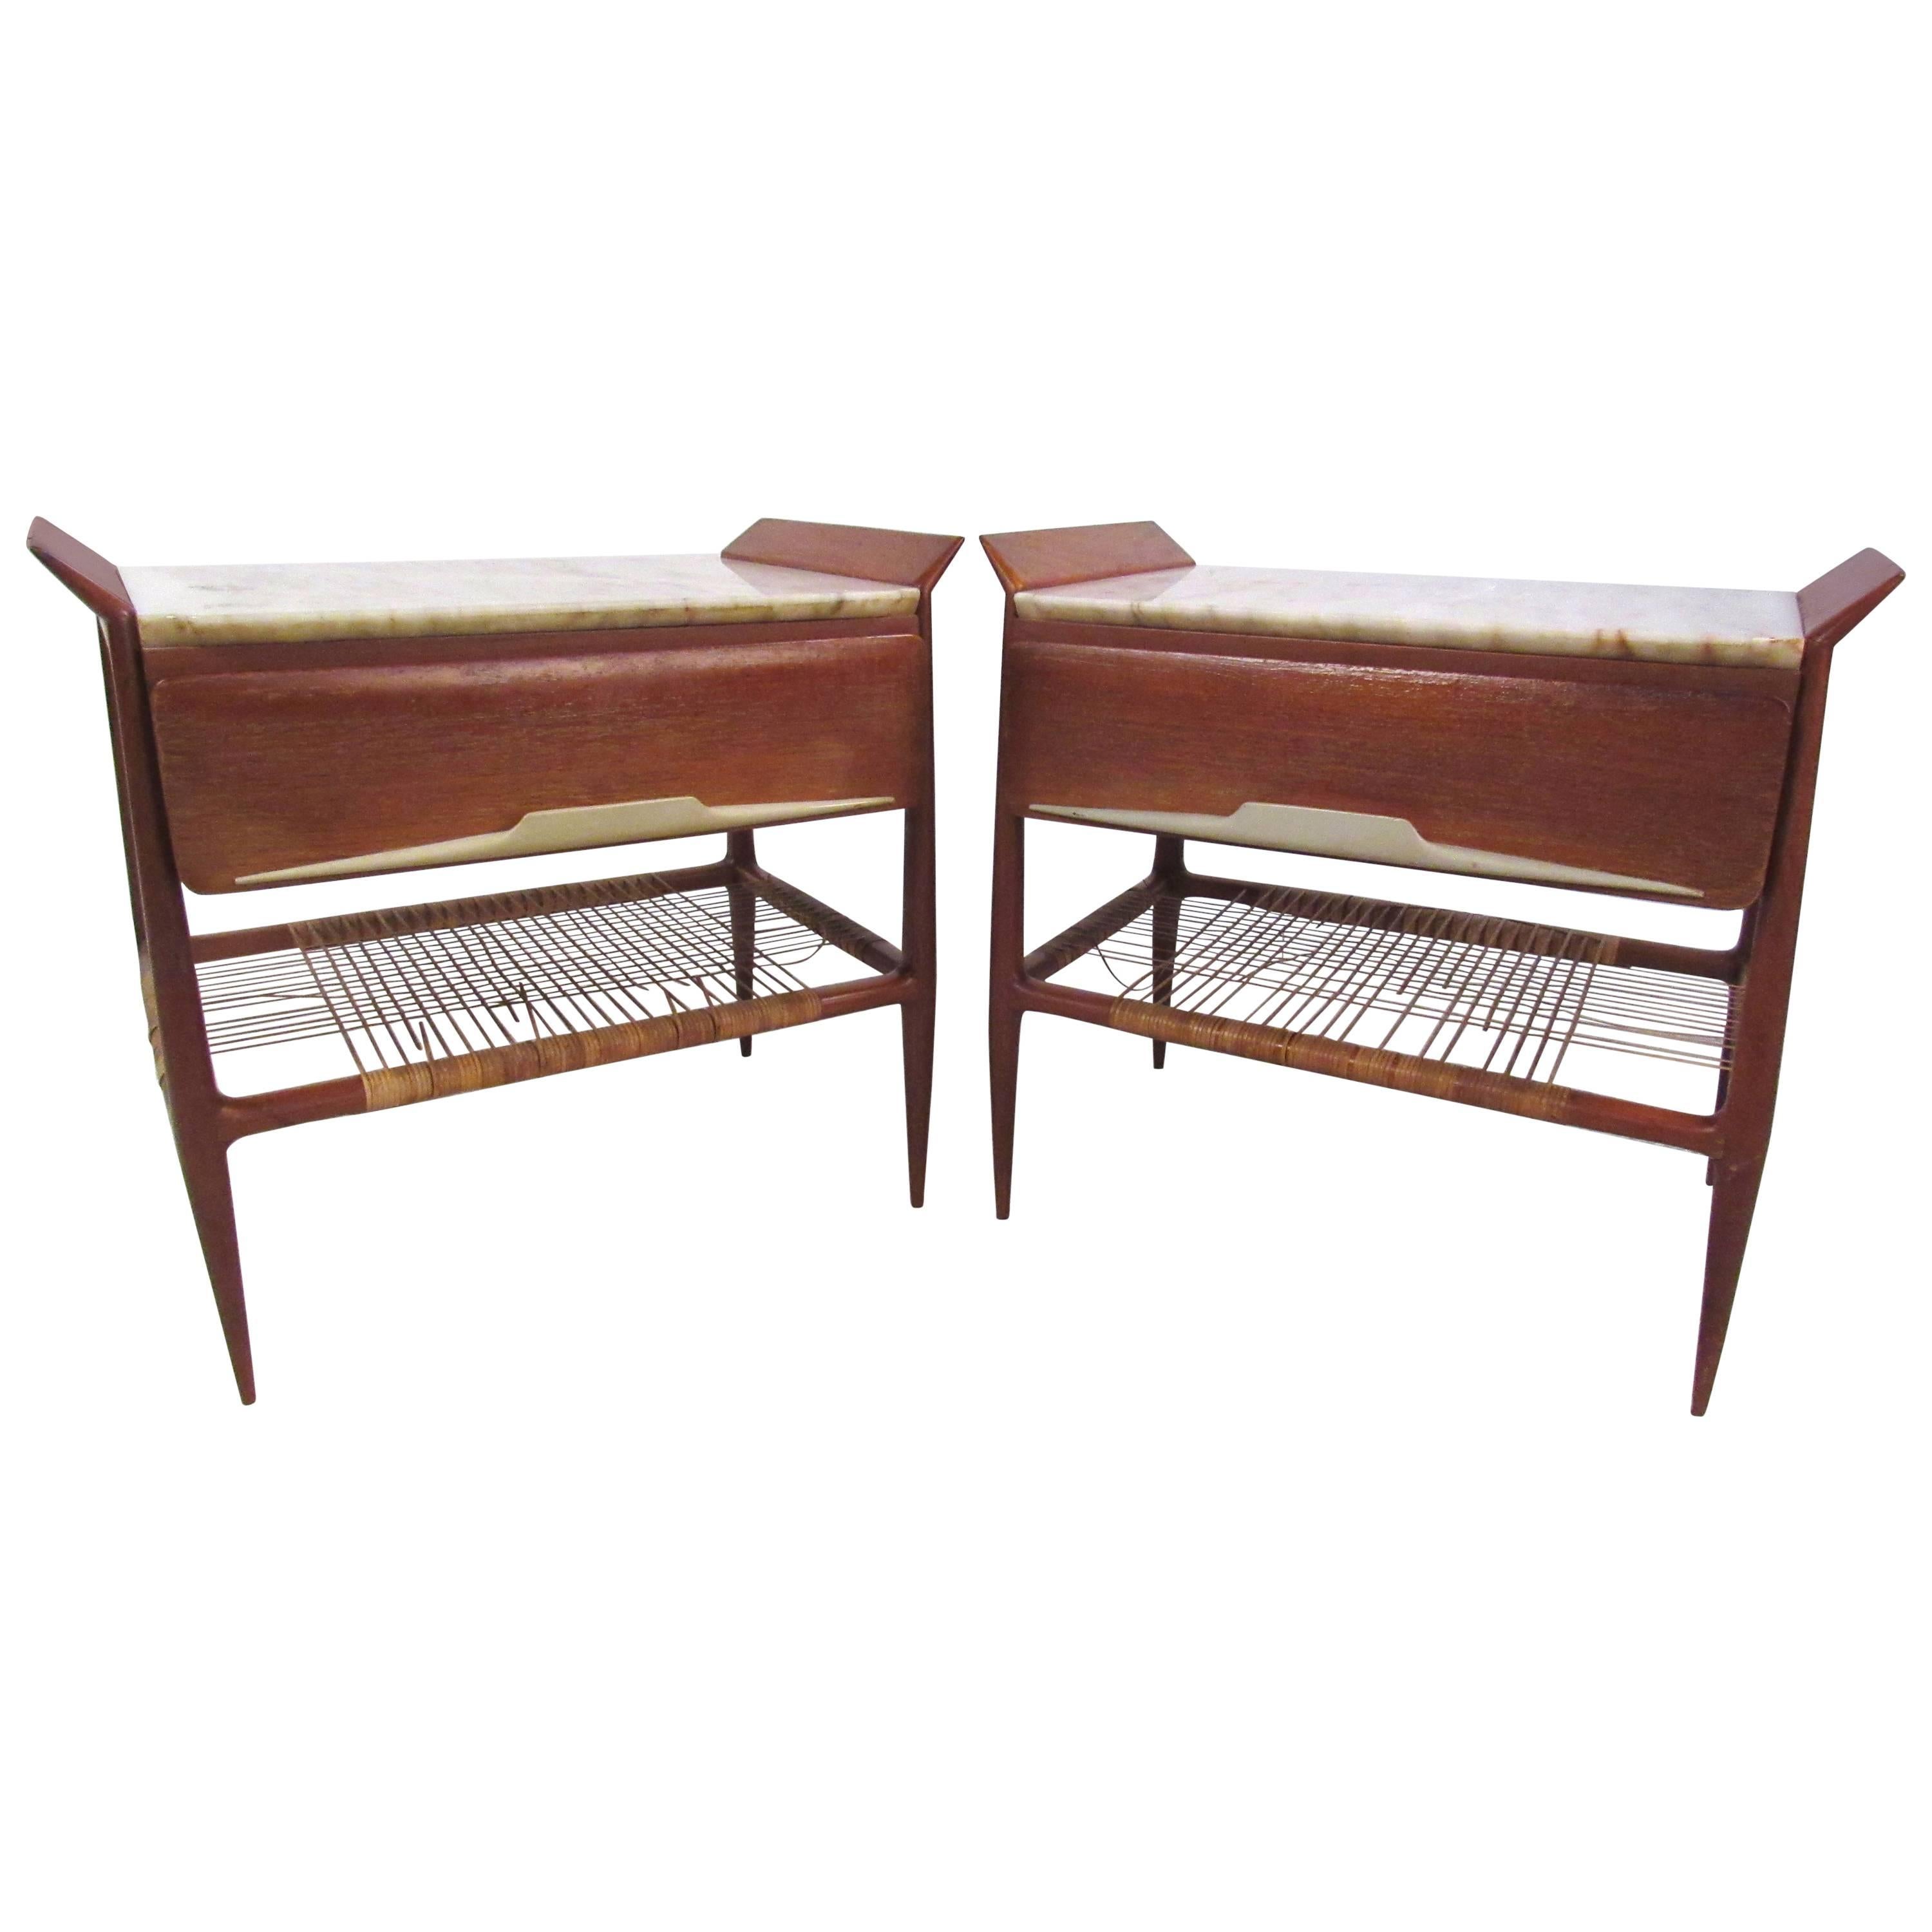 Pair of Mid-Century Modern Italian Nightstands with Marble Tops